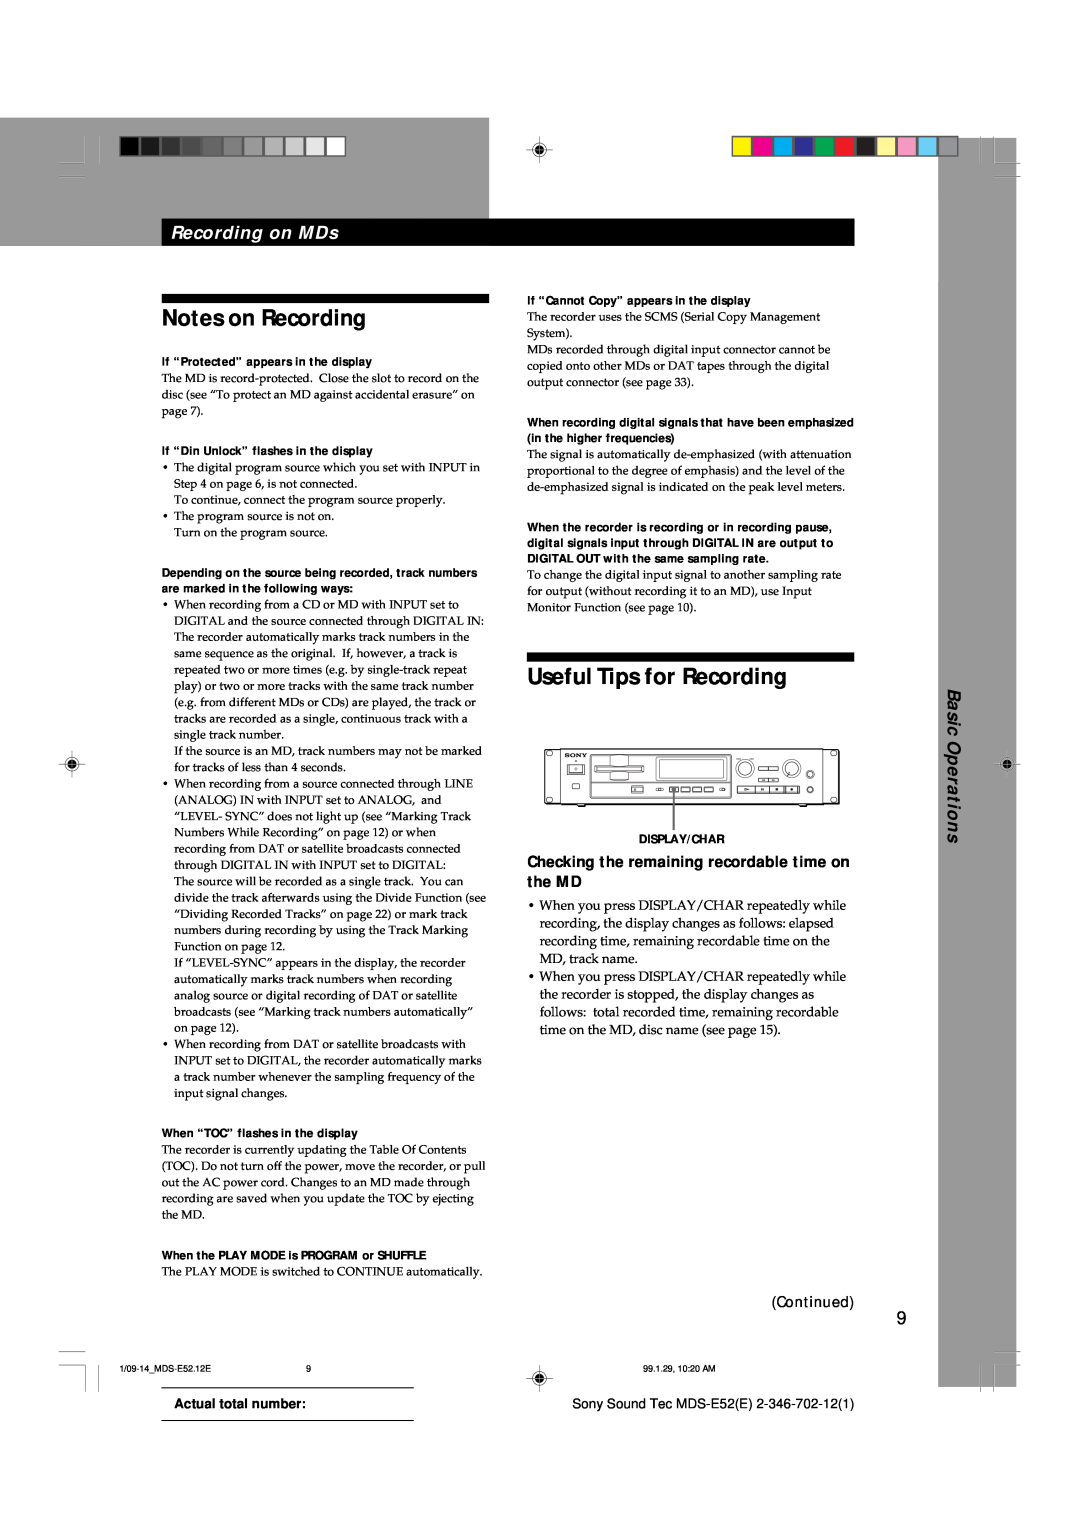 Sony MDS-E52 manual Notes on Recording, Useful Tips for Recording, Recording on MDs, Continued, Basic Operations 